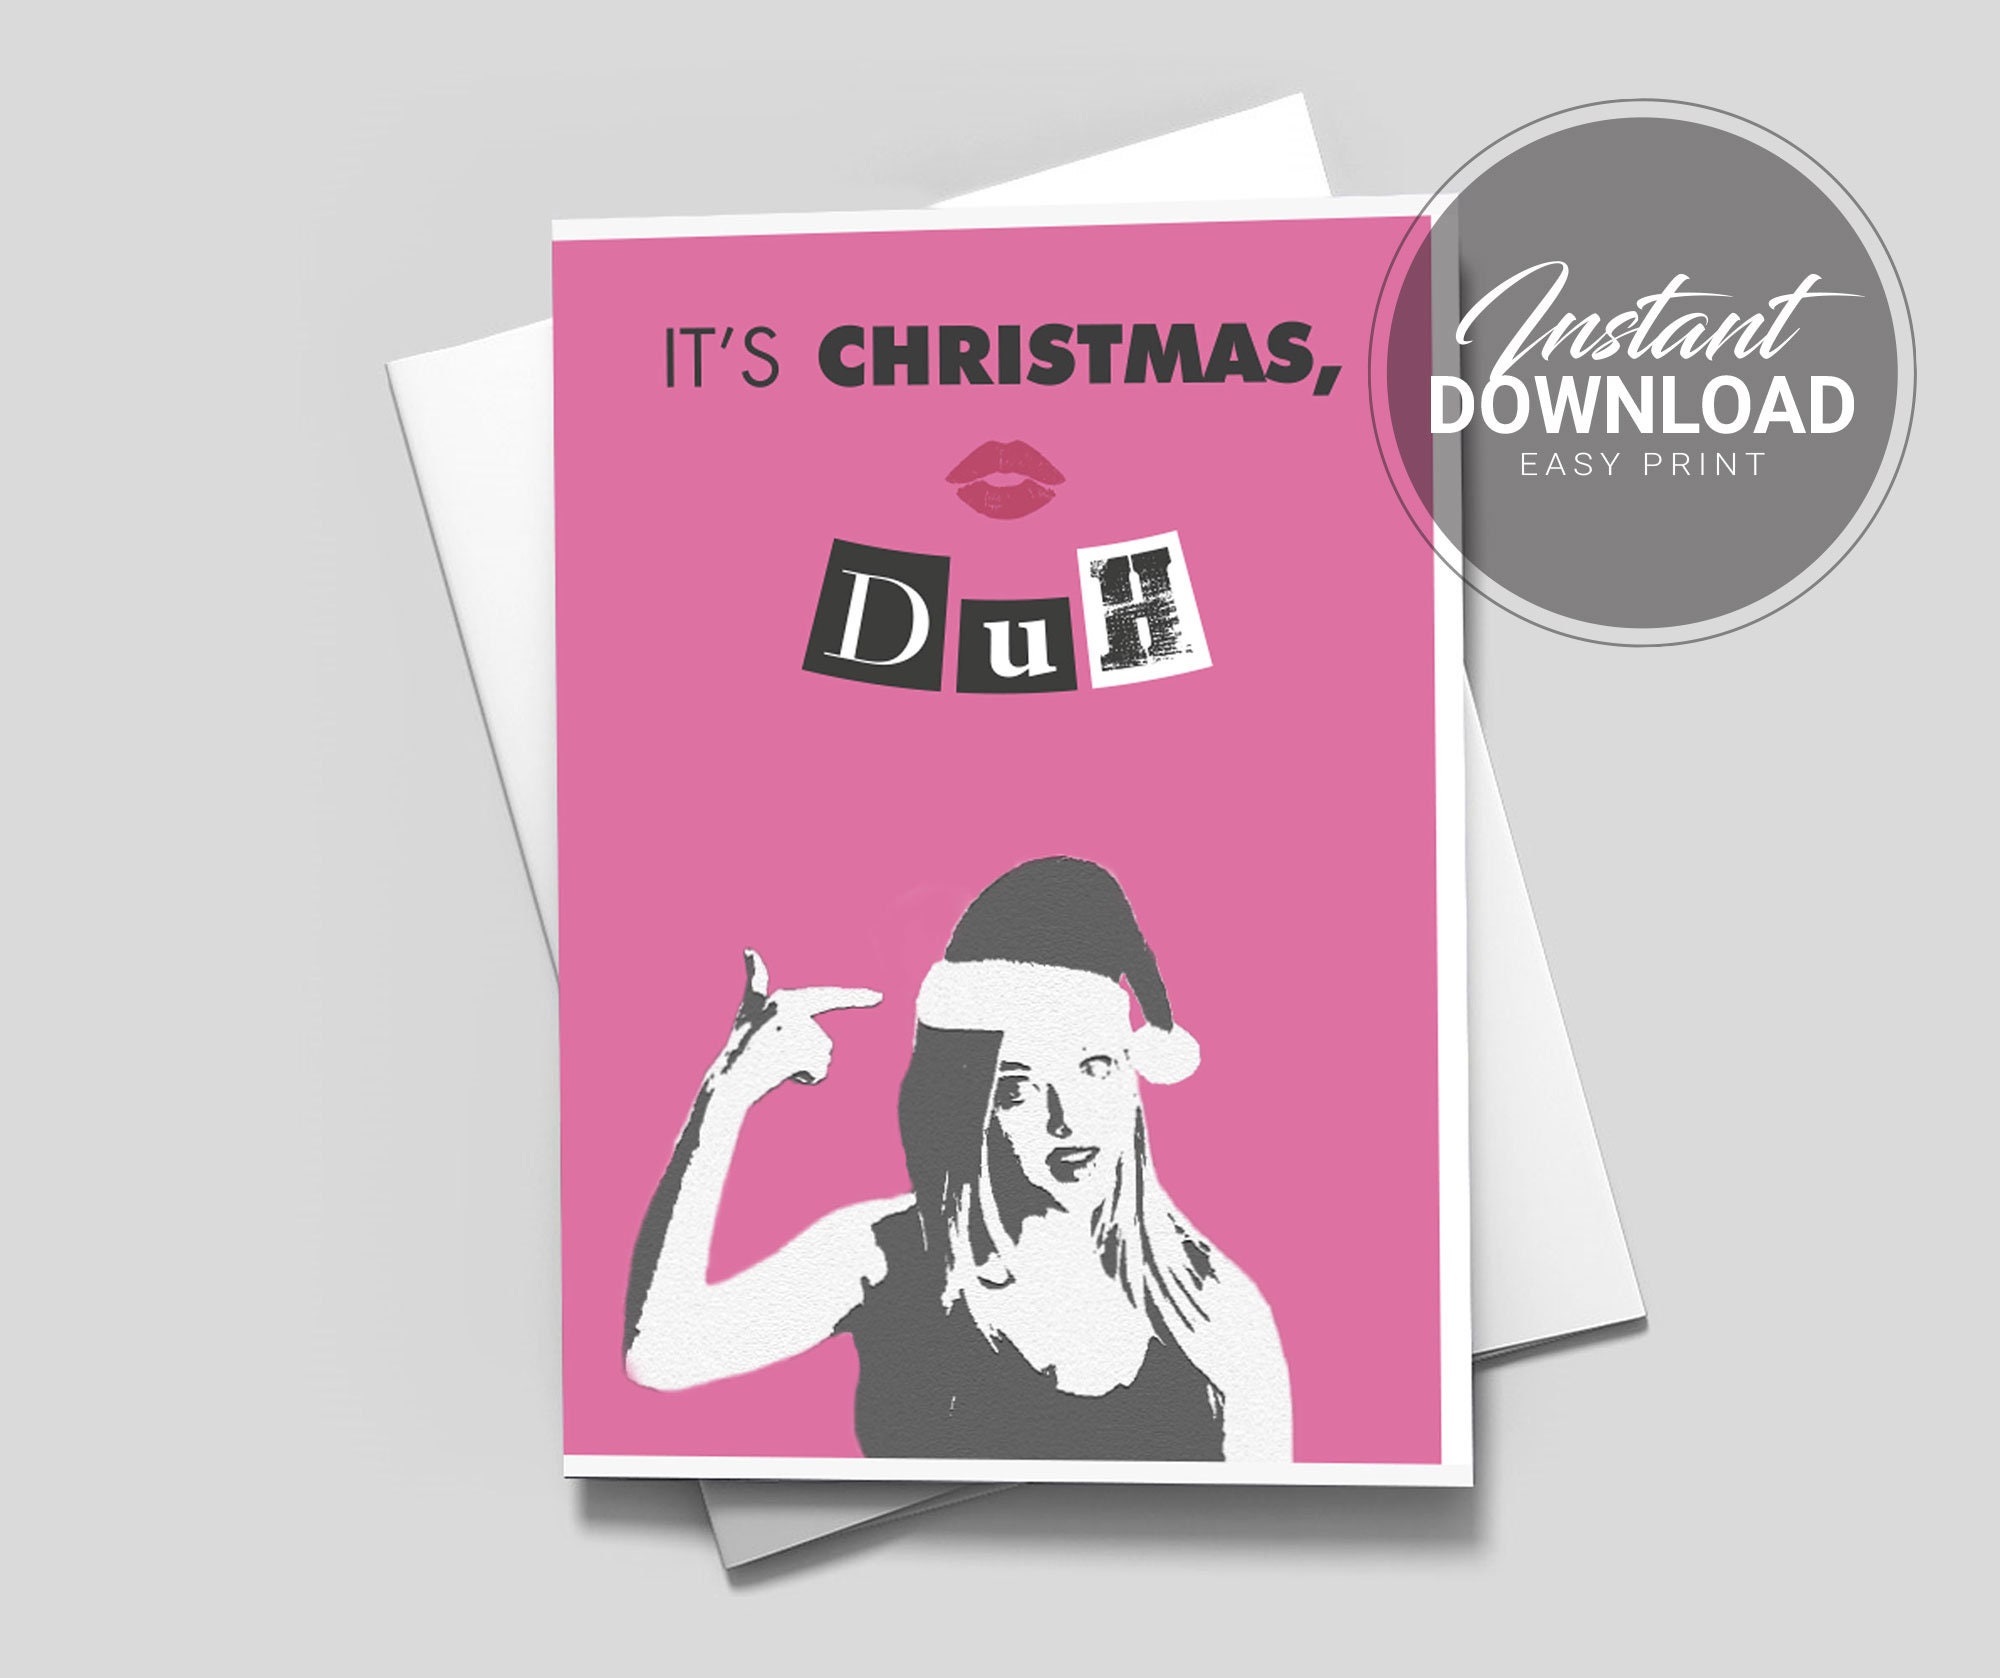 The Burn book. - Mean girls. Greeting Card for Sale by Duckiechan